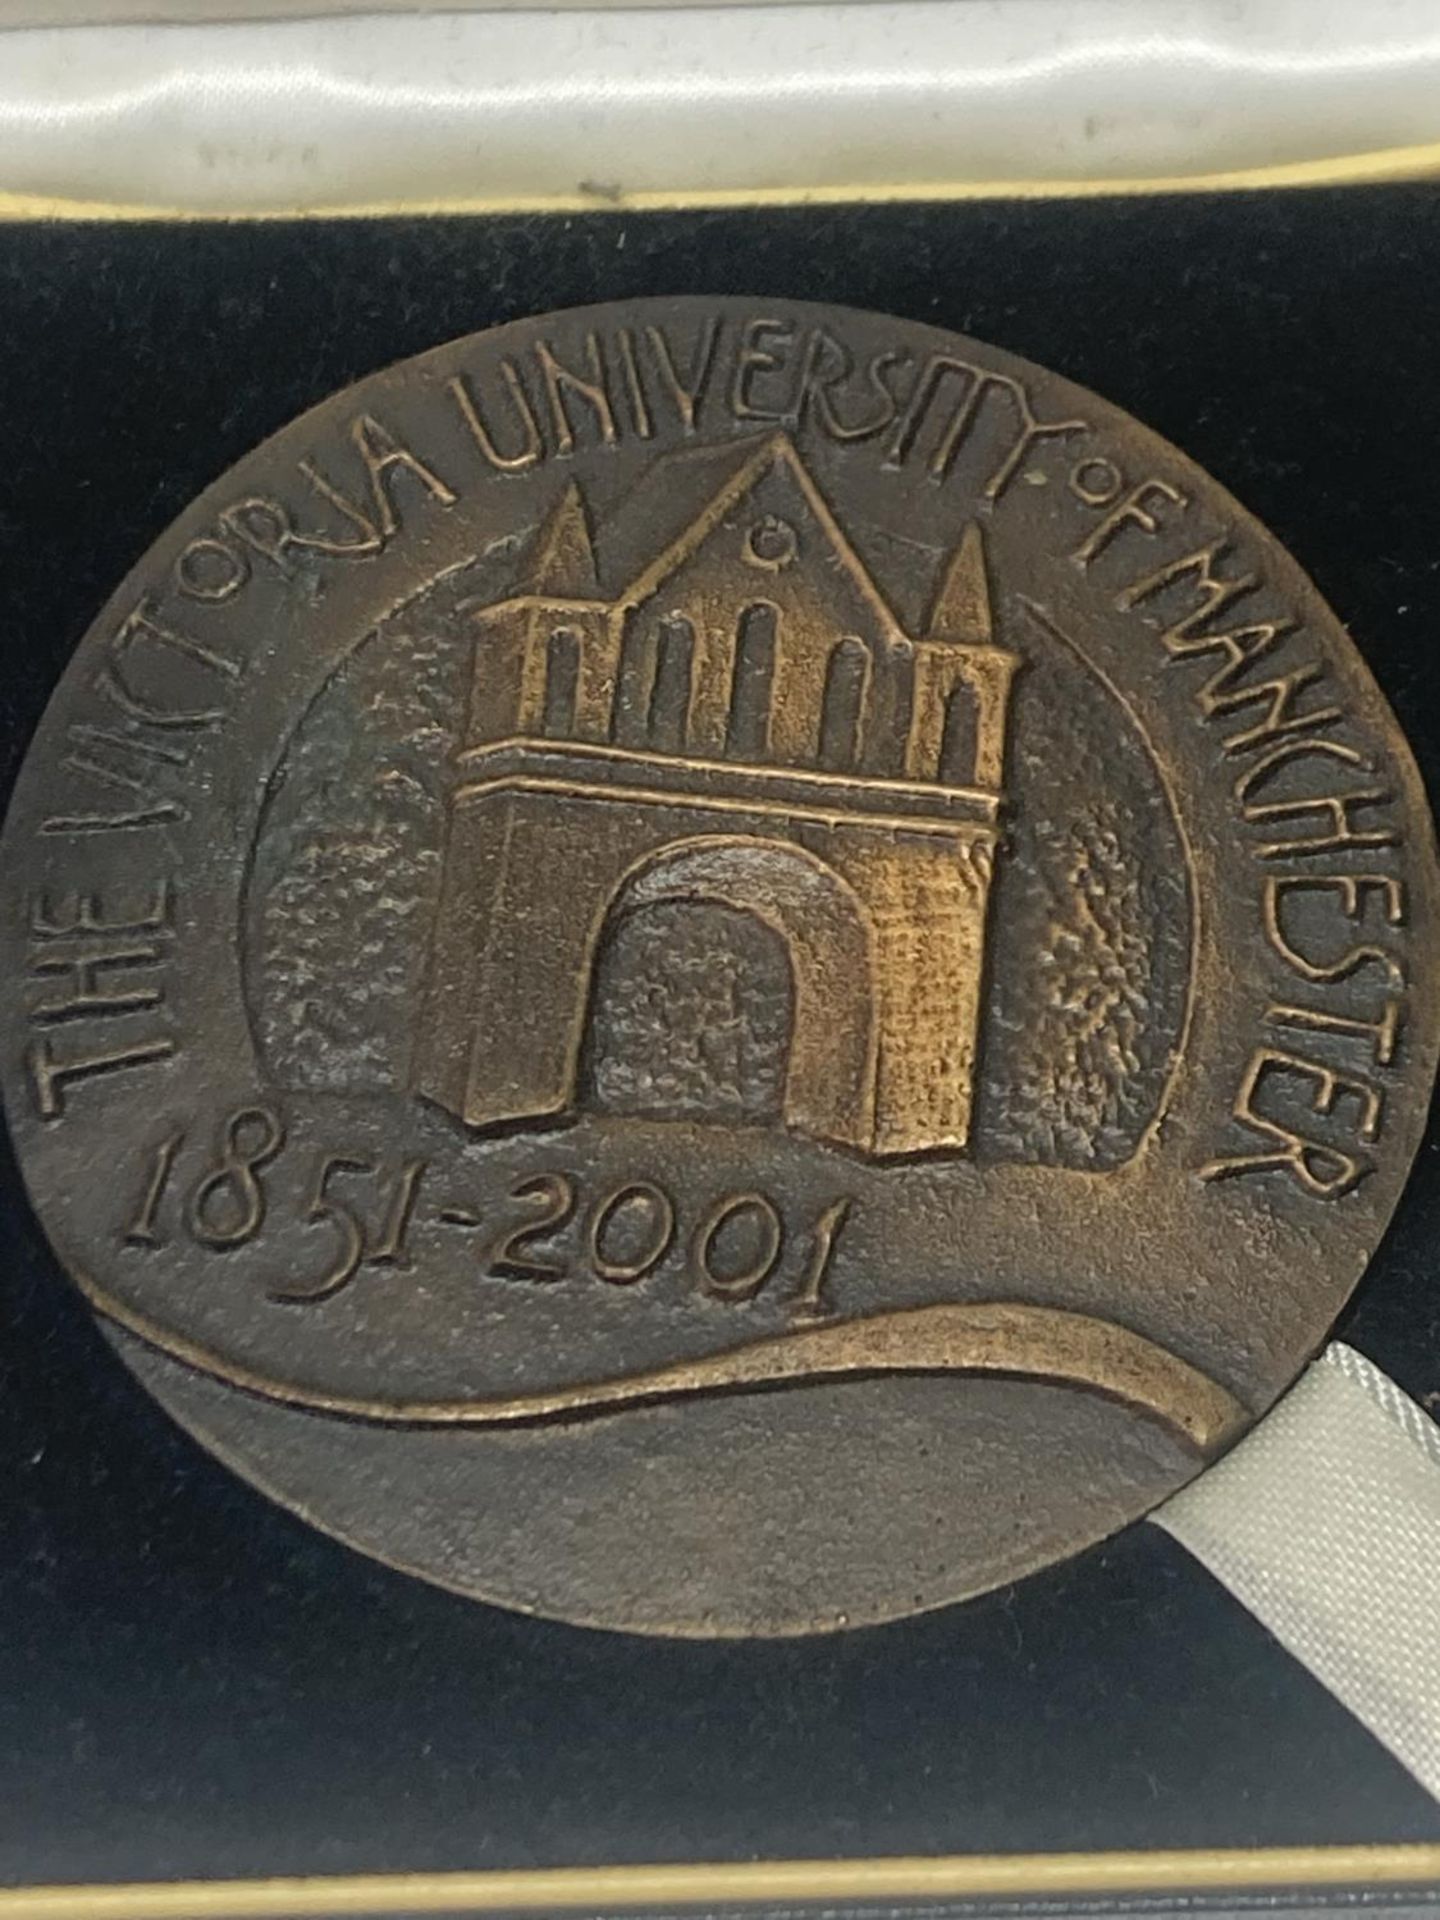 A LARGE BRONZE MEDAL VICTORIA UNIVERSITY OF MANCHESTER 1851 -2001 IN A PRESENTATION BOX - Image 4 of 6